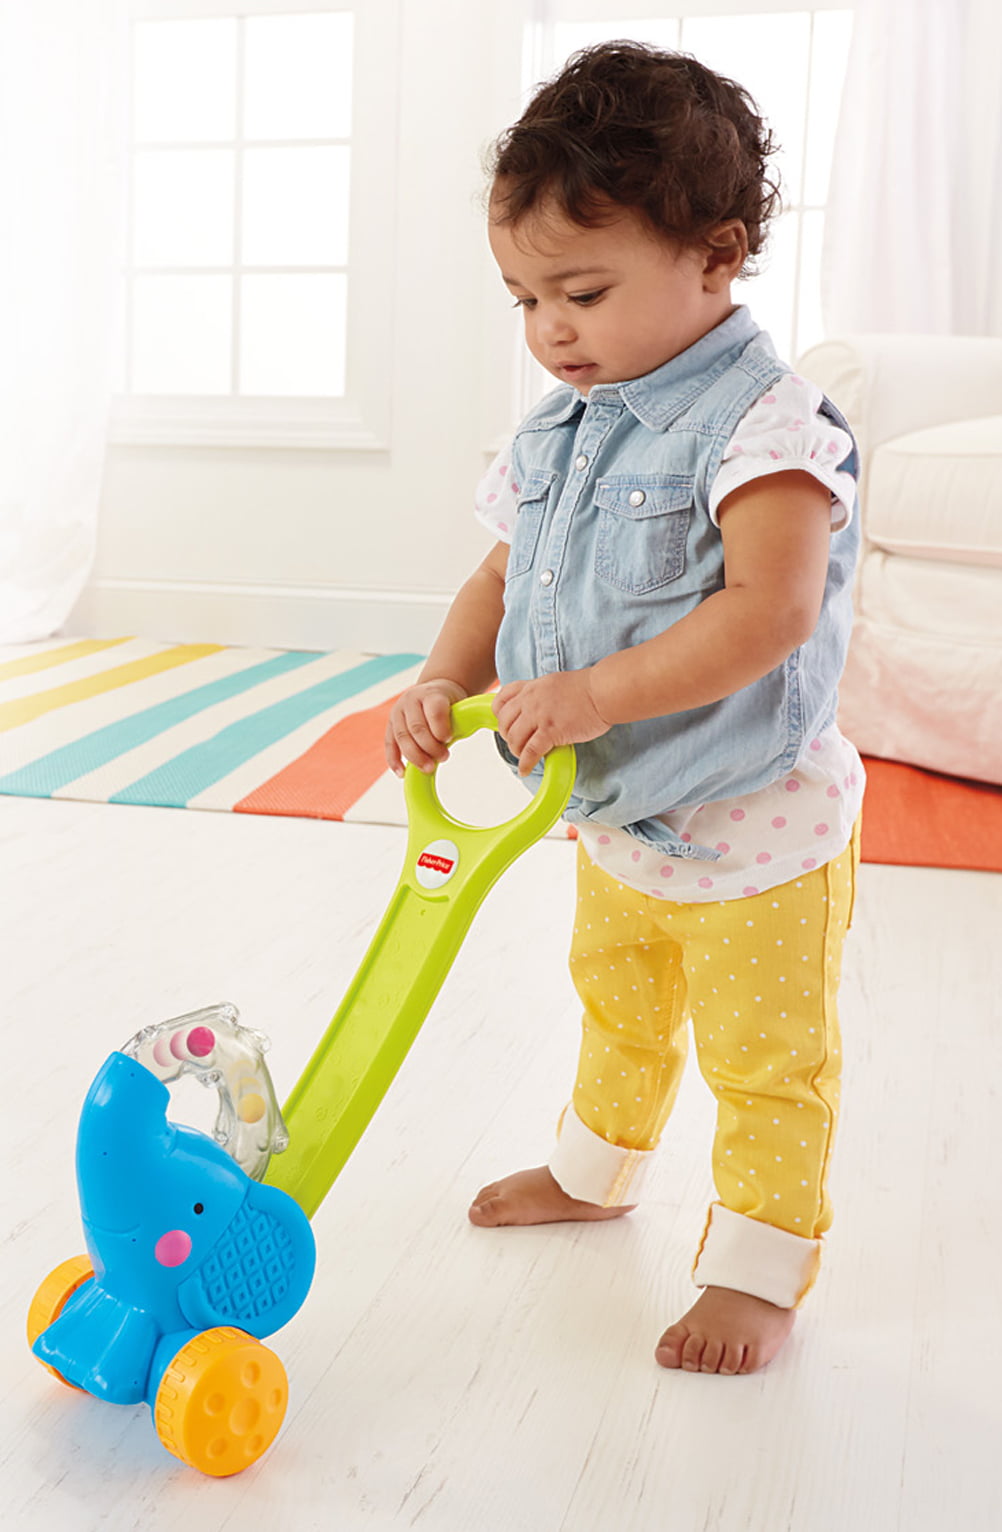 fisher price elephant pop and push